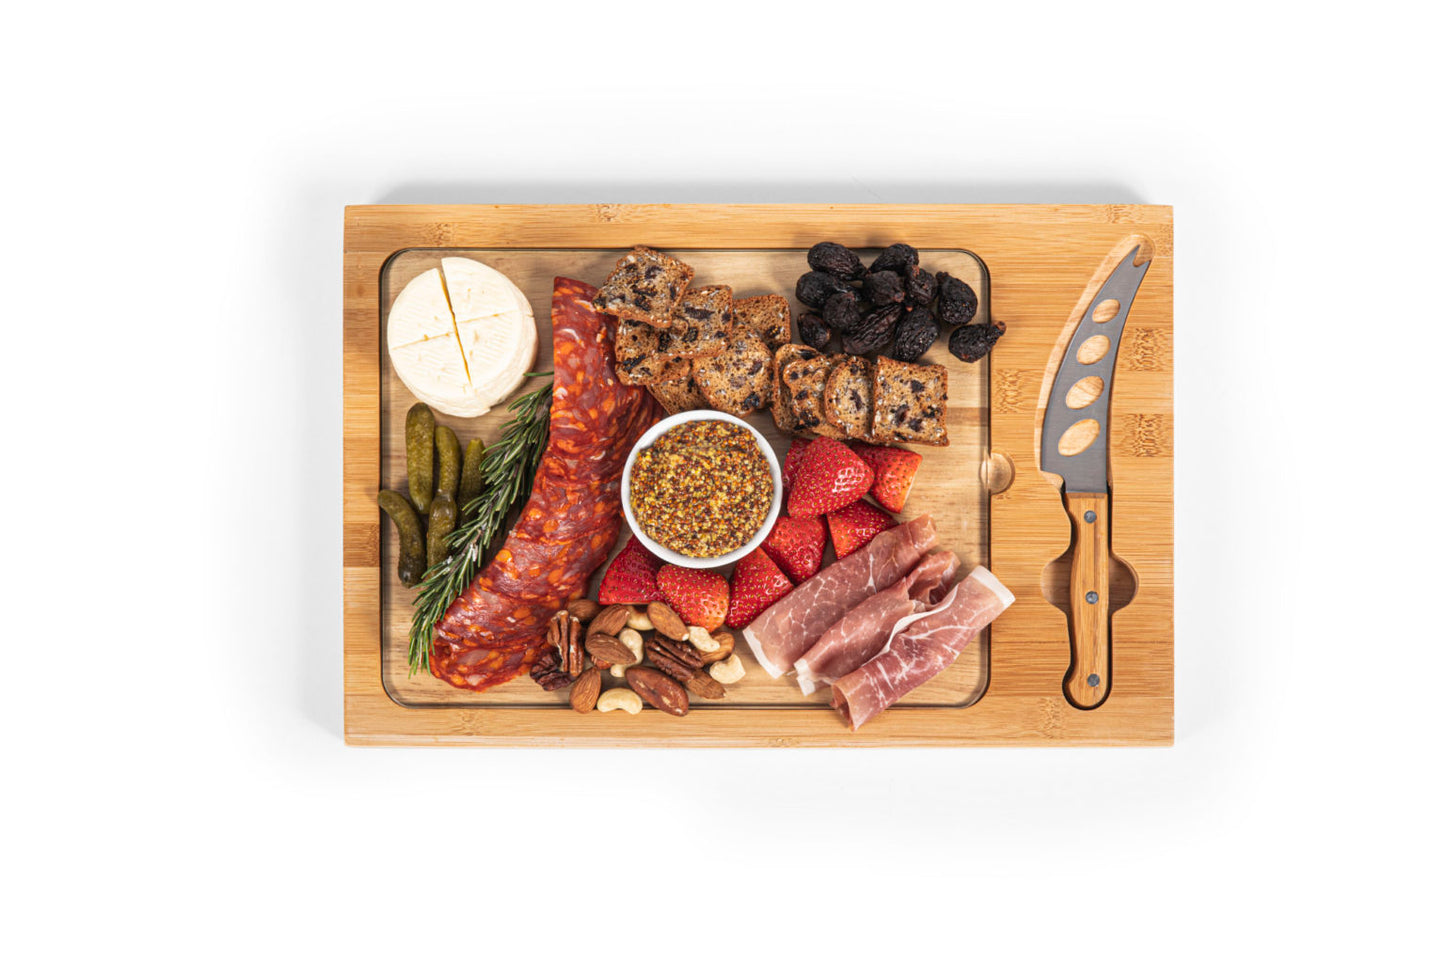 Chicago Bears - Icon Glass Top Cutting Board & Knife Set by Picnic Time